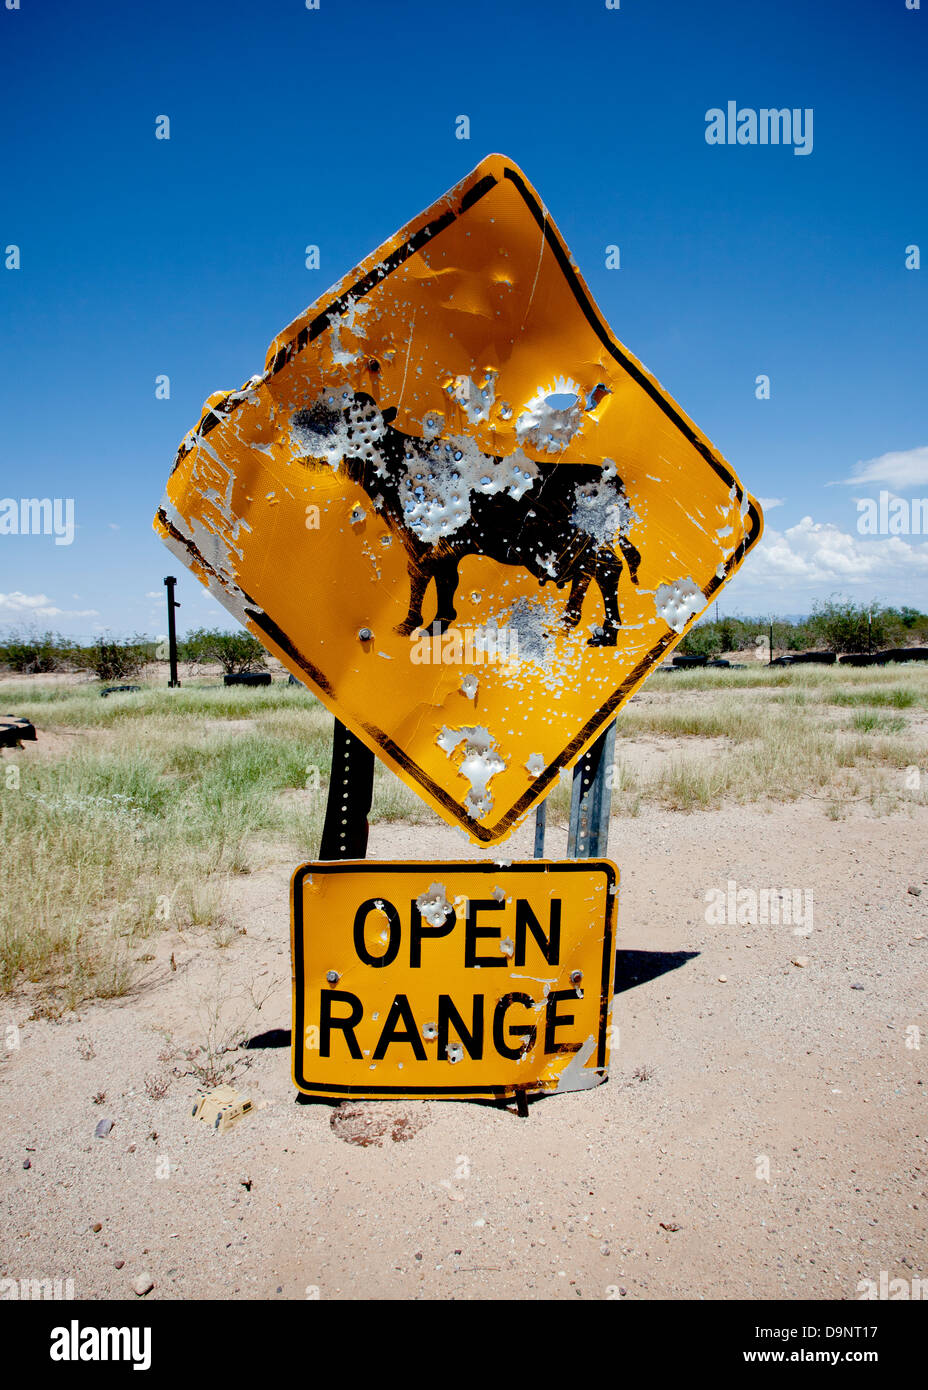 Open Range Sign Warns of Loose Livestock on Road Stock Image - Image of  meadow, green: 176053789